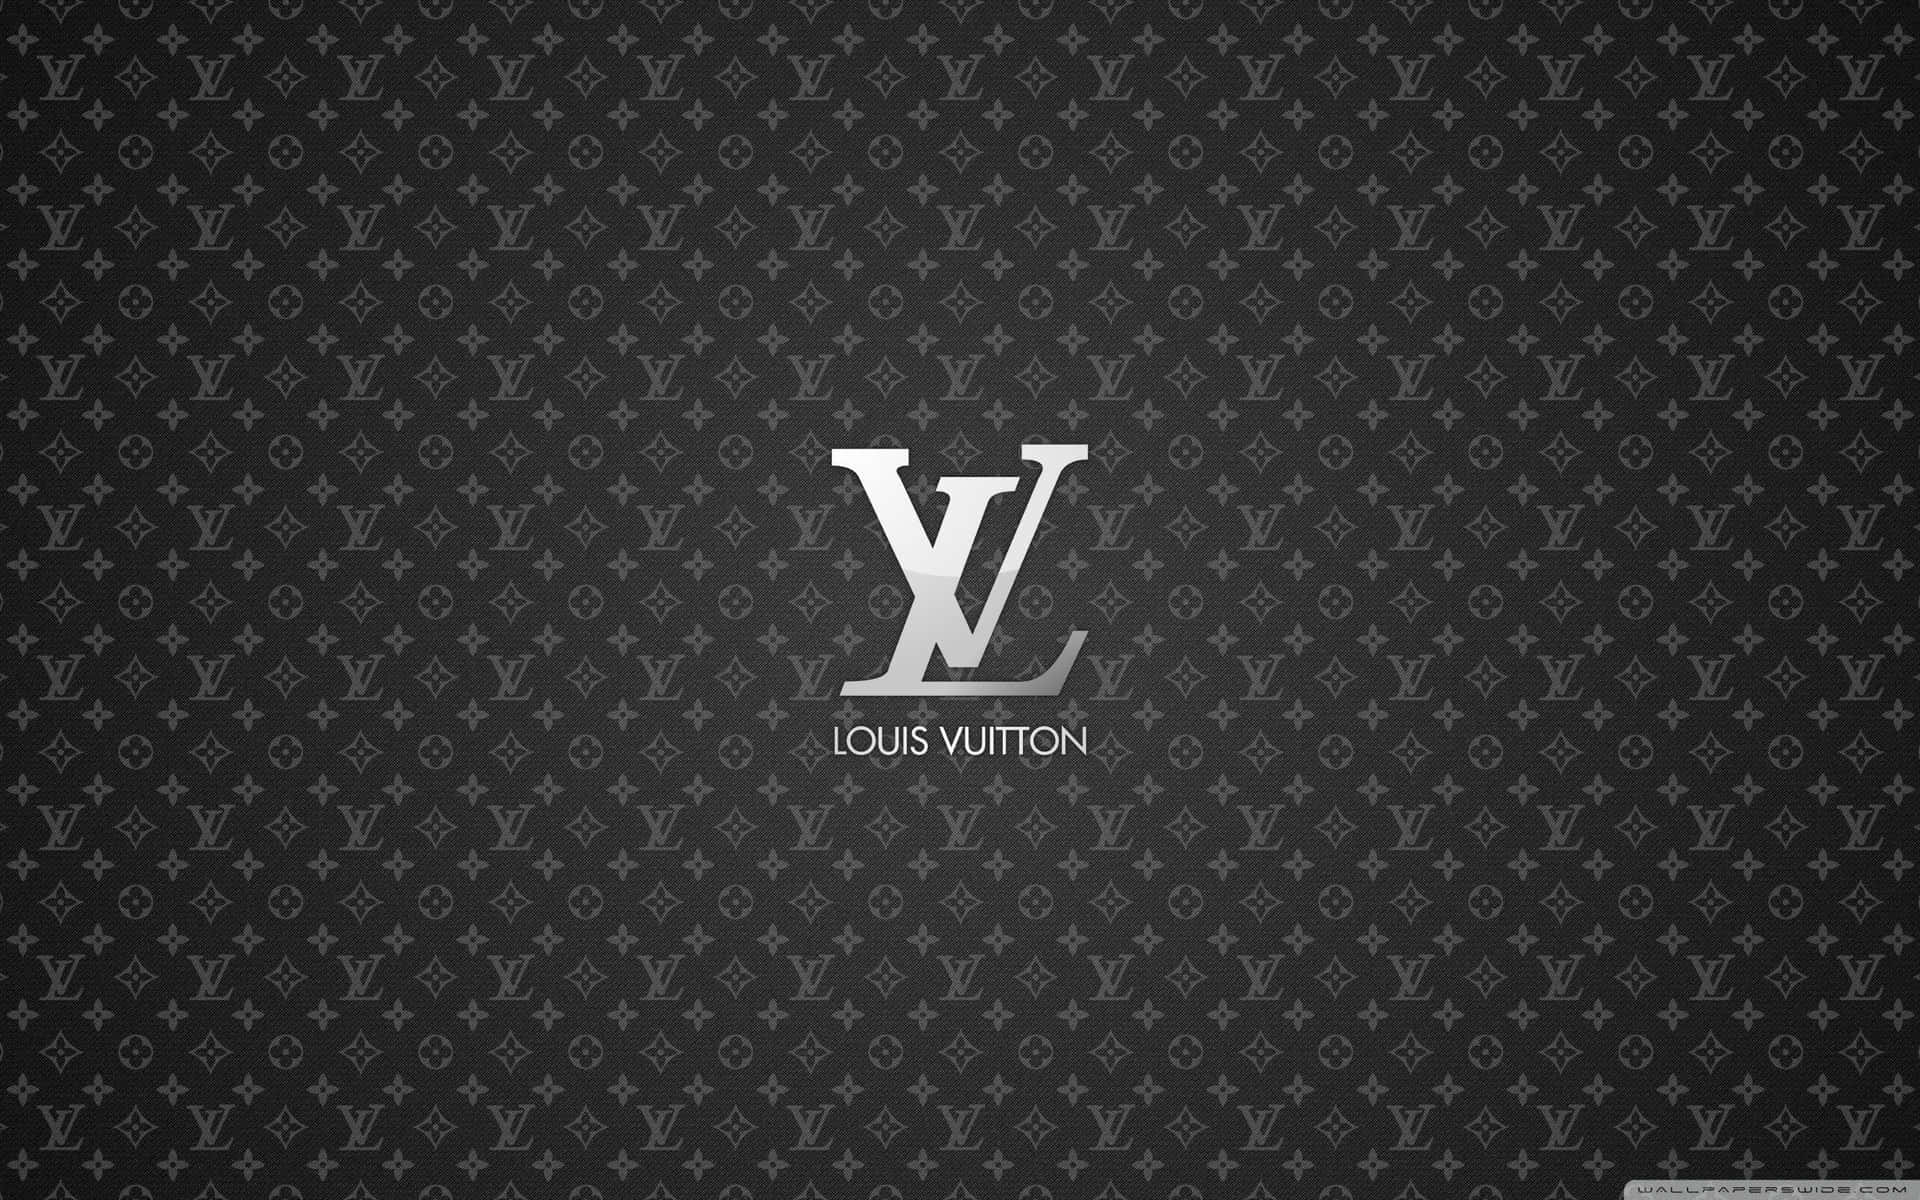 Download Upgrade Your Computer with an Iconic Louis Vuitton Desktop  Wallpaper